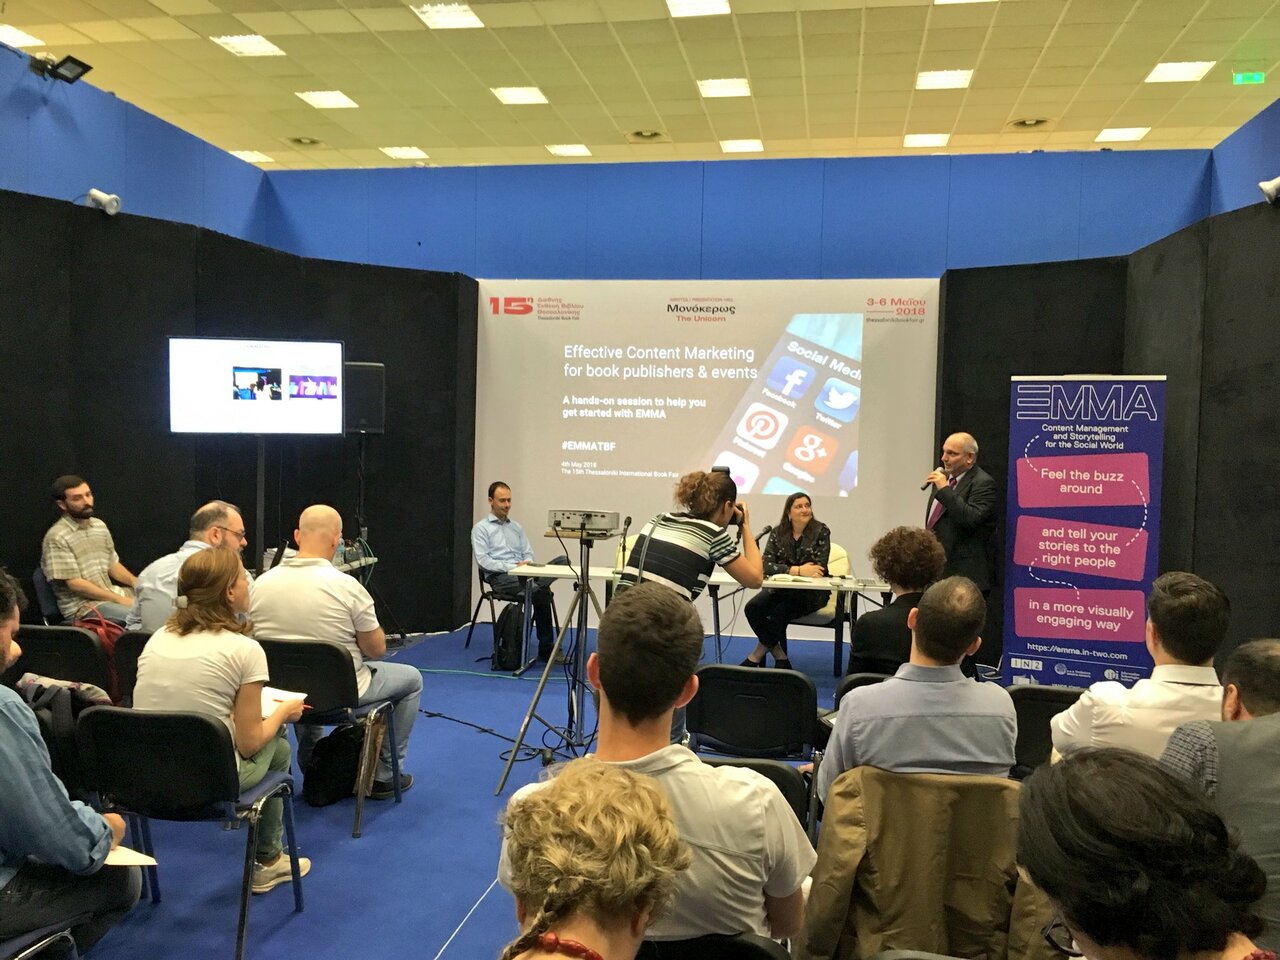 George Ioannidis (@hicoo42) opens the #emmatbf session on the #socialmedia & content management platform @EMMA_H2020 at #tbf18 #publishing https://t.co/aap8PJwibr